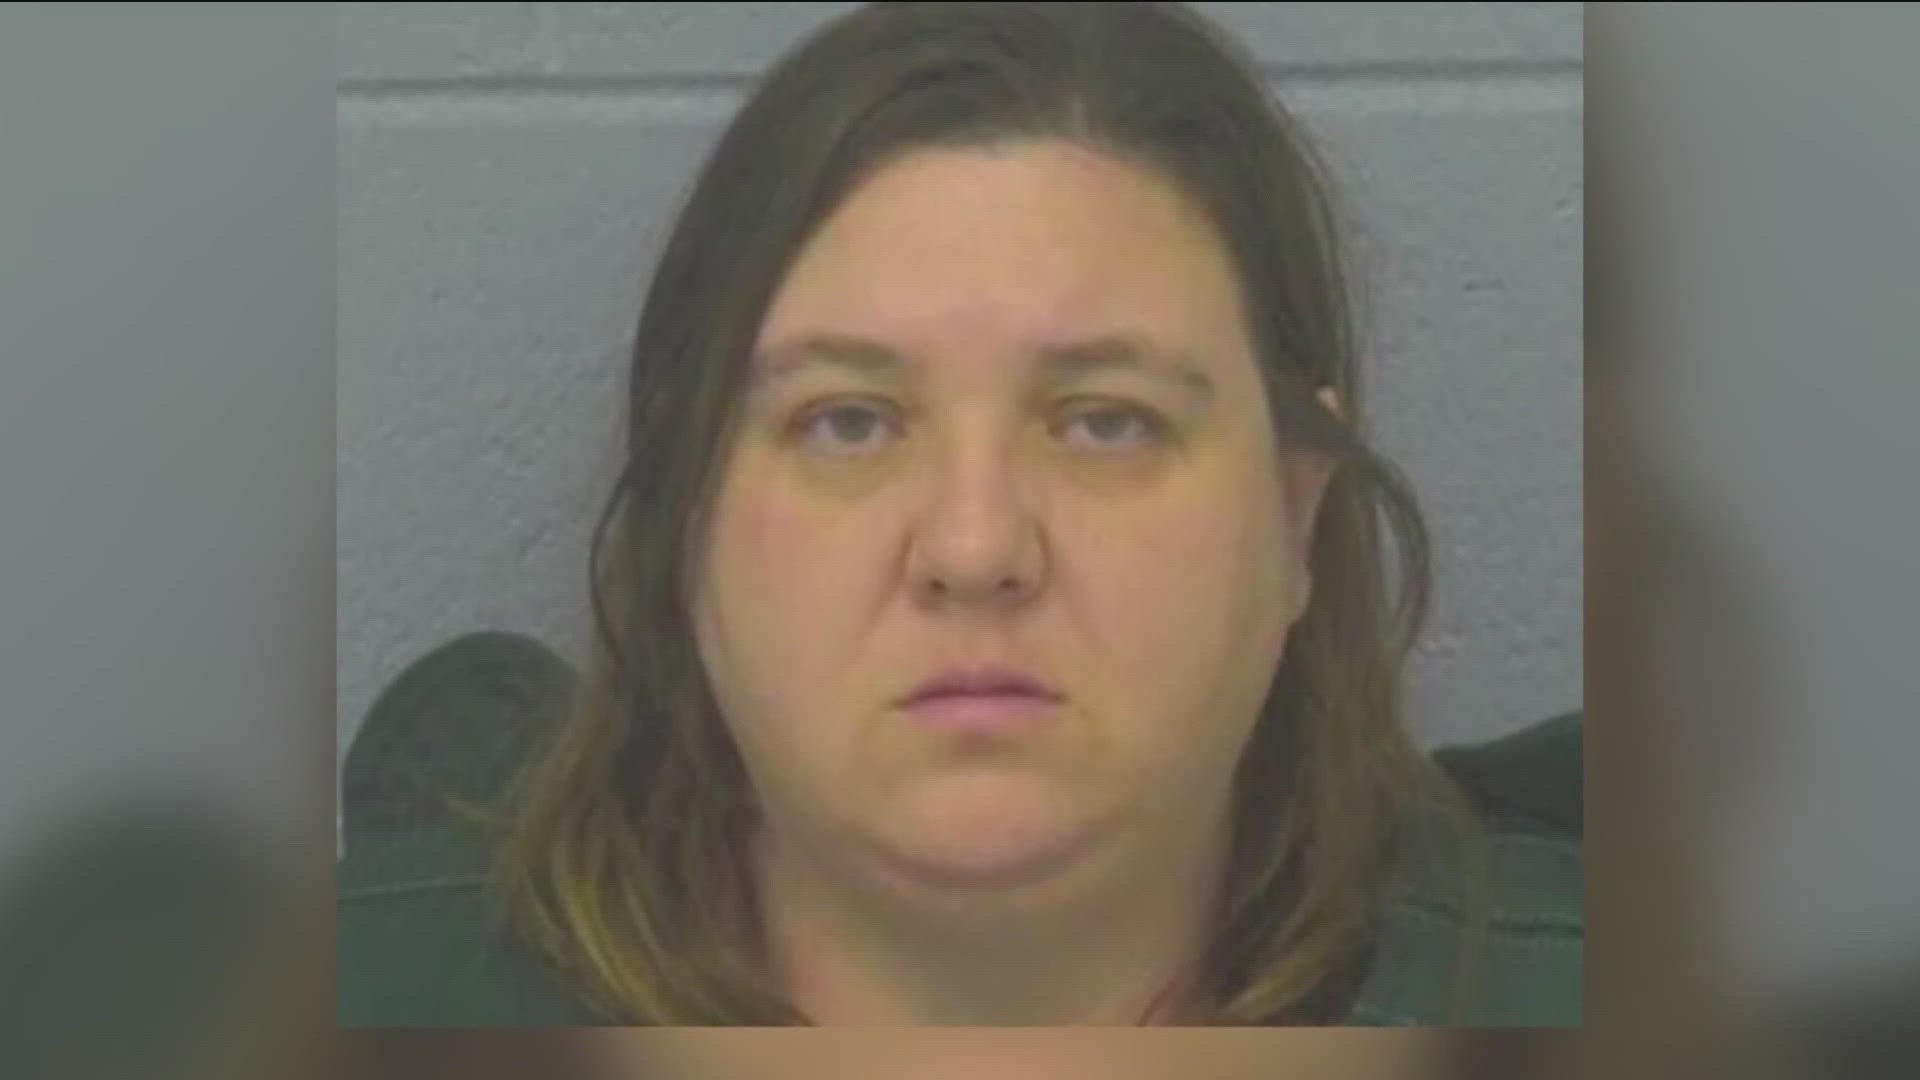 She's facing charges of causing the death of an unborn child and kidnapping resulting in death.